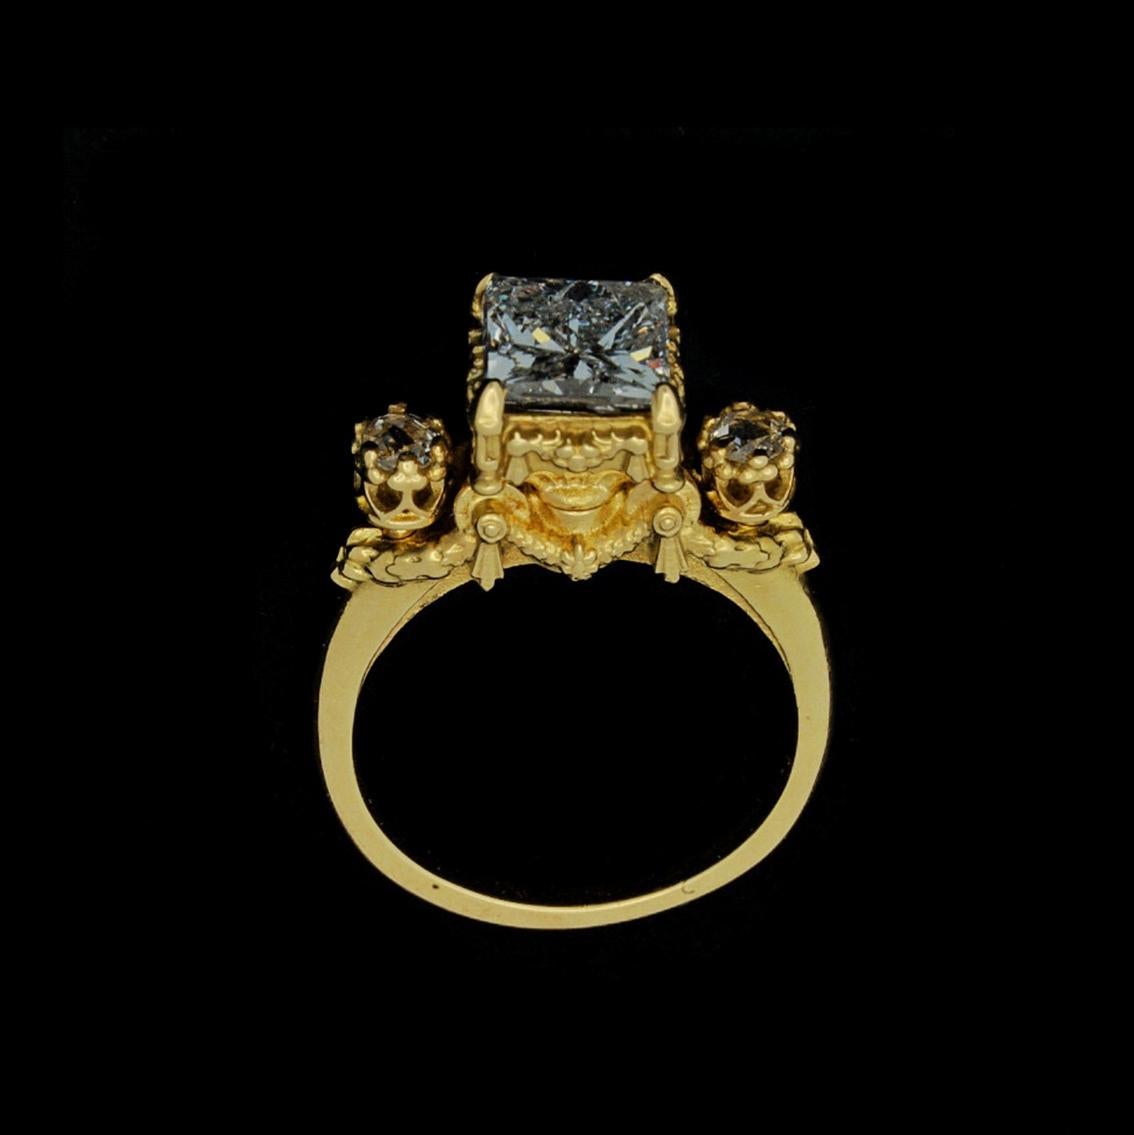 Heavenly Infatuation Ring in 18 Karat Yellow Gold with Diamonds im Zustand „Neu“ in Melbourne, Vic